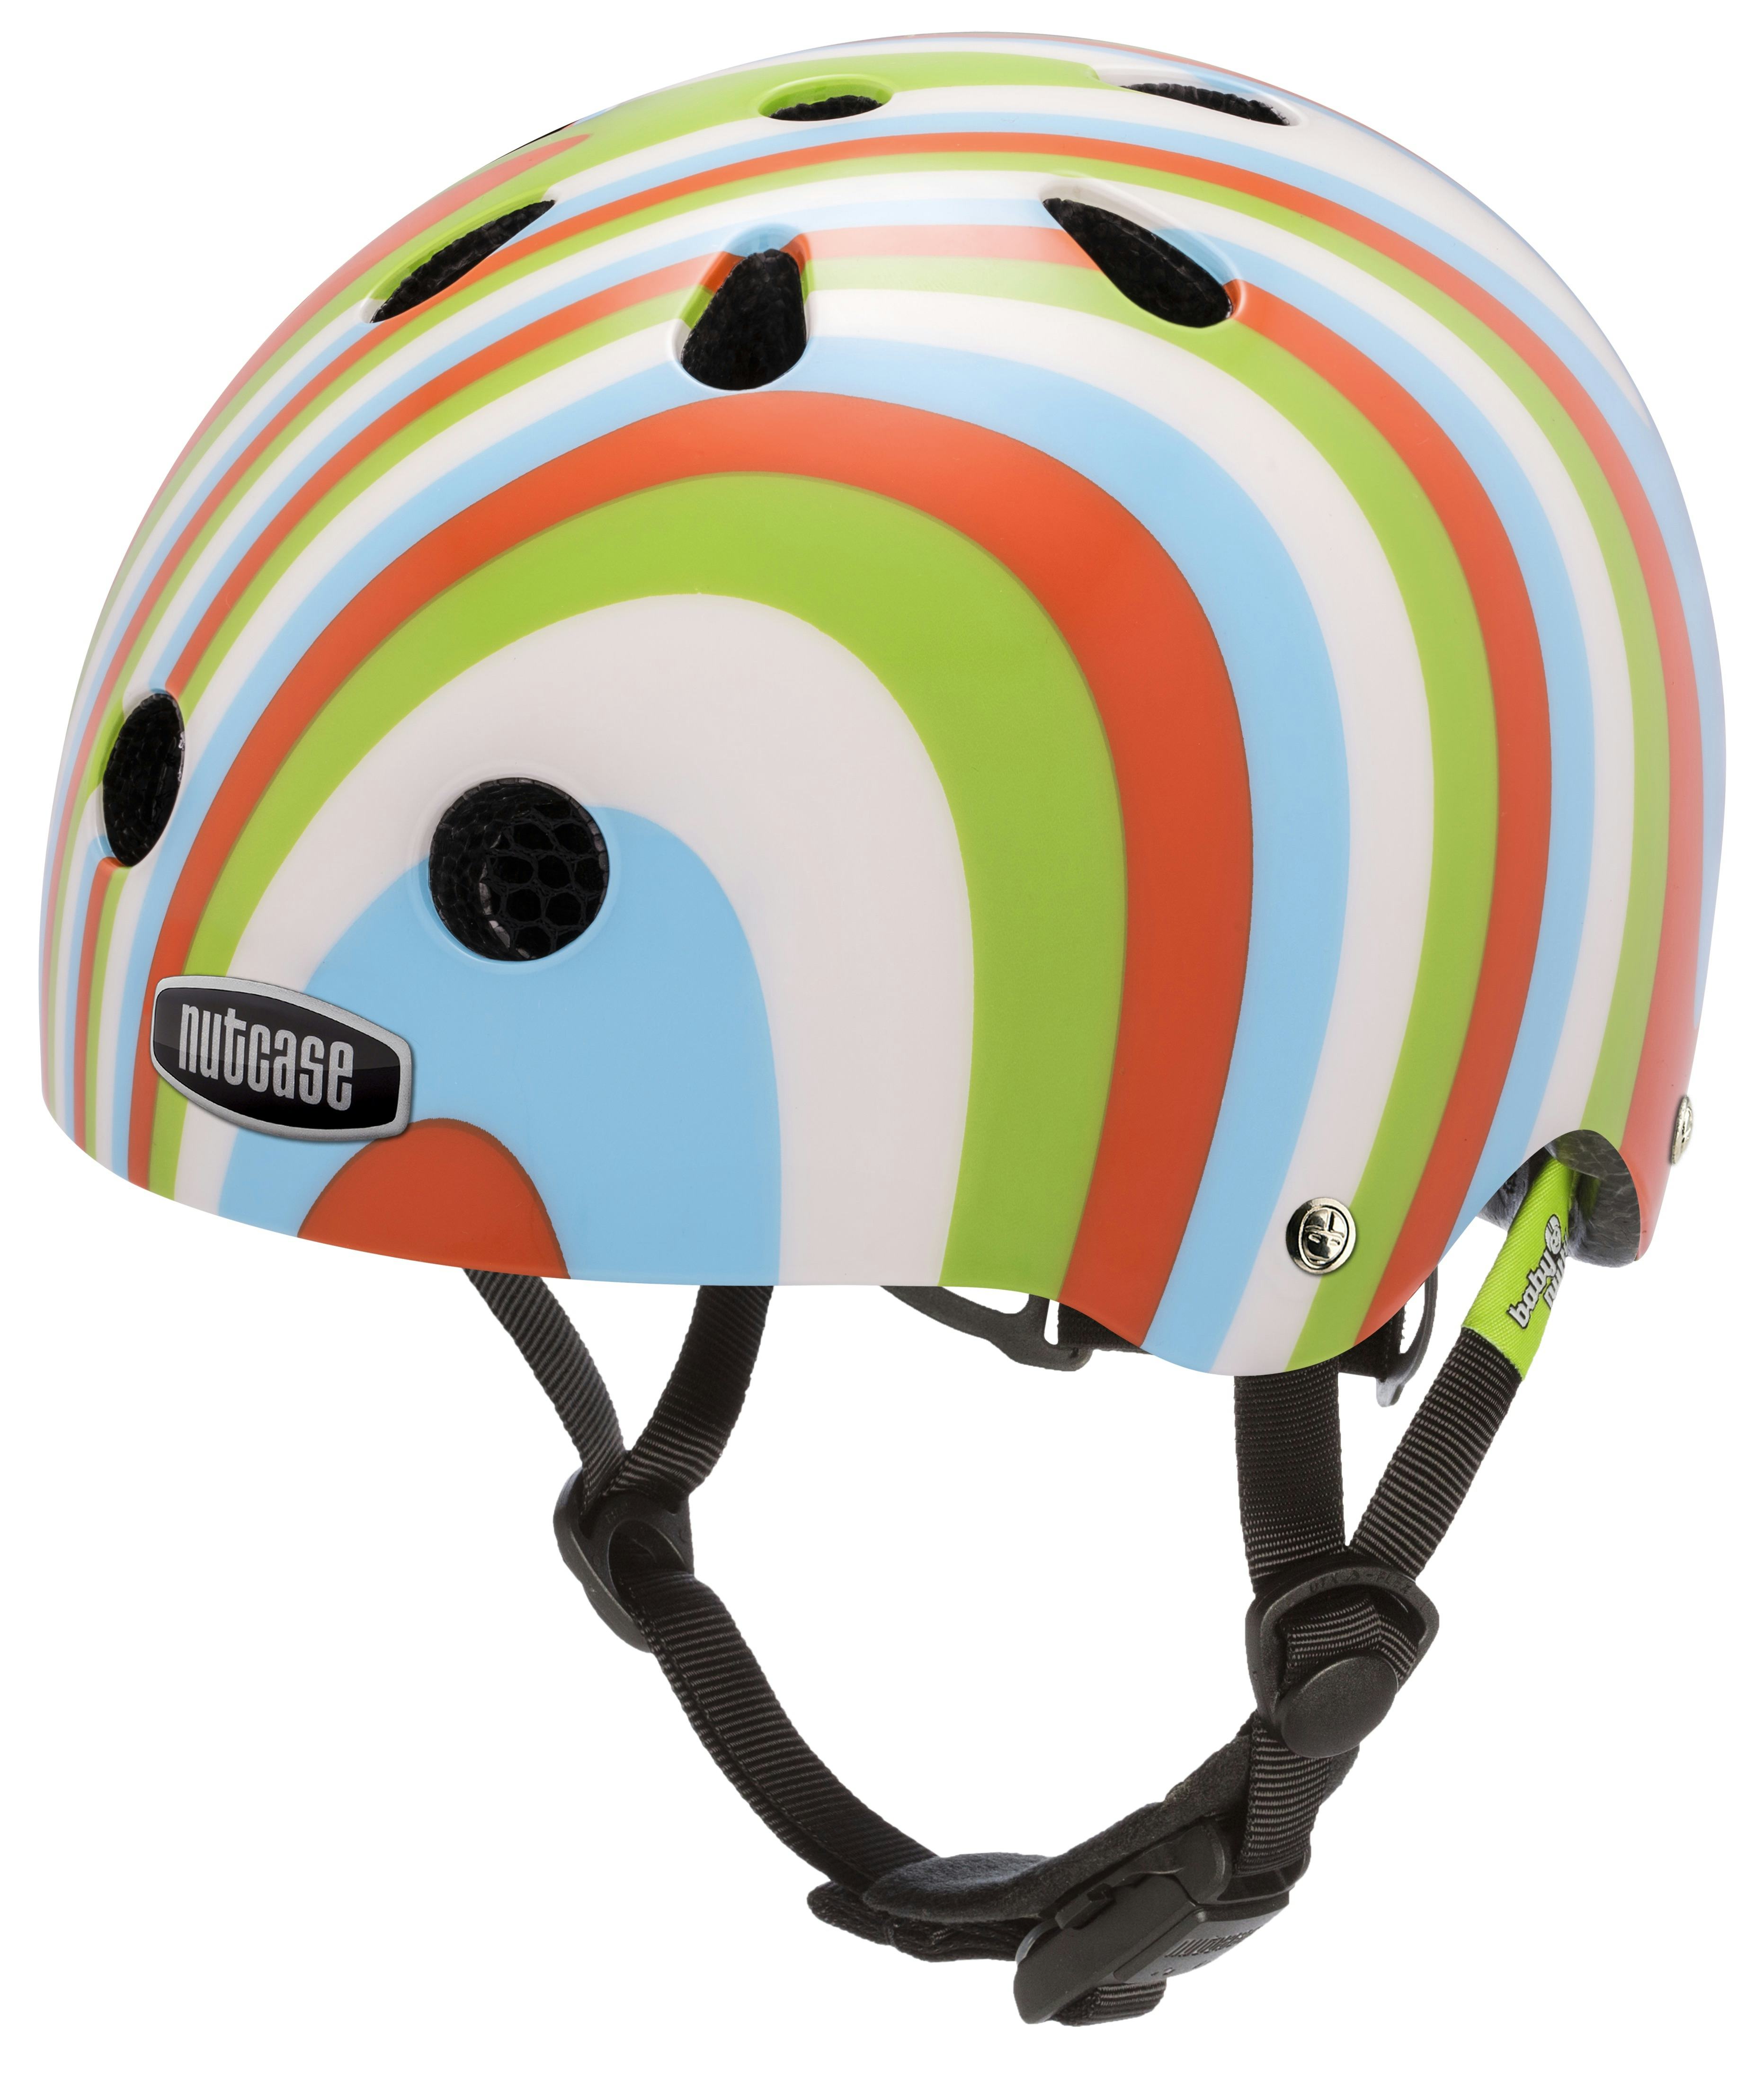 Nutcase is known for its remarkable helmet designs. – Photo Nutcase